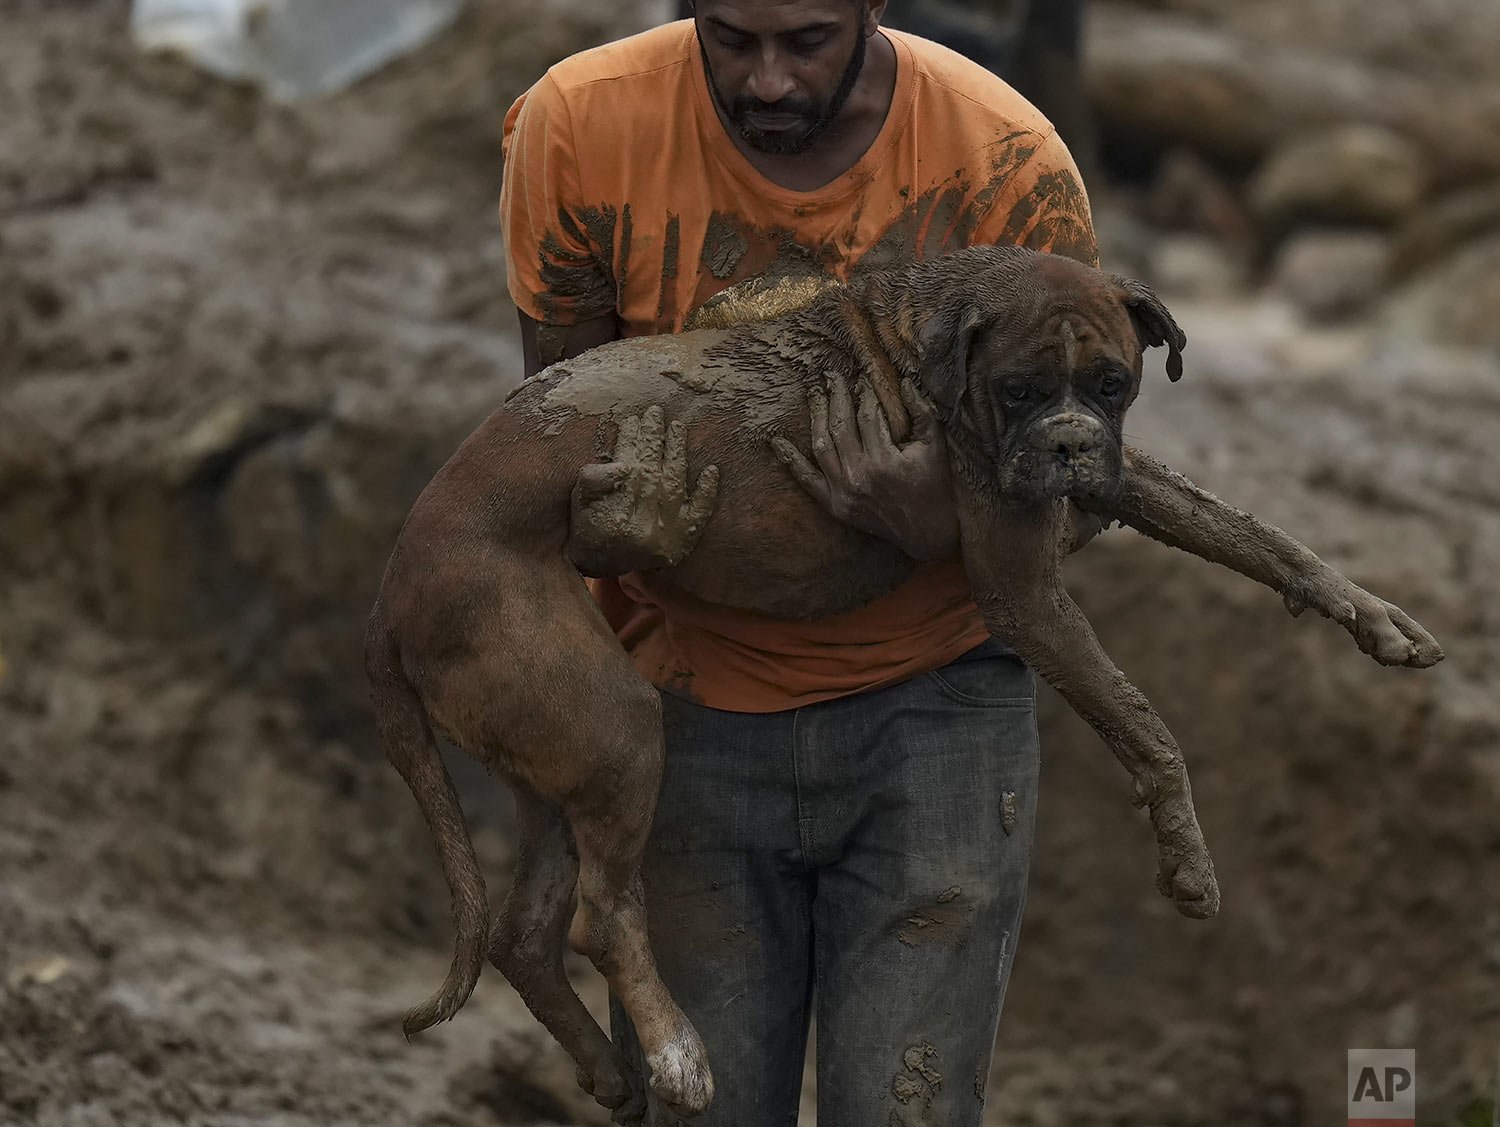  A man carries a dog away from a residential area destroyed by mudslides in Petropolis, Brazil, Feb. 16, 2022. Extremely heavy rains set off mudslides and floods in the mountainous area of Petropolis, killing over 200 people. (AP Photo/Silvia Izquier